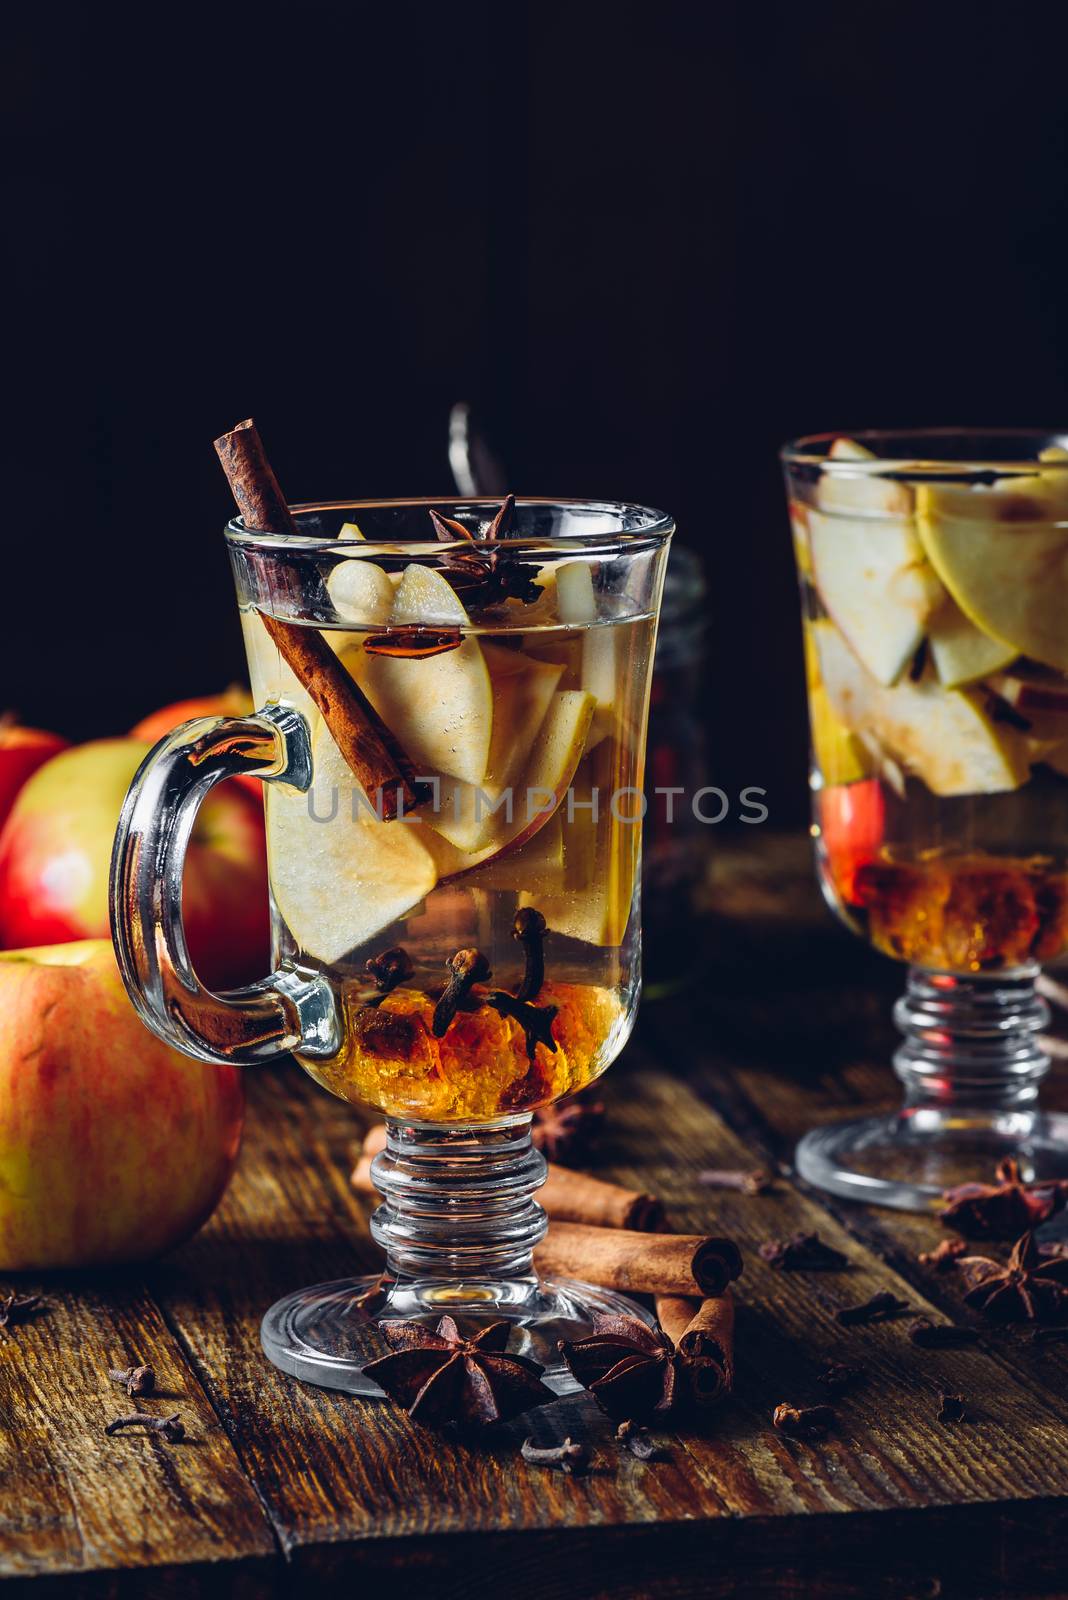 Two Glasses of Christmas Mulled Wine with Sliced Apple, Clove, Cinnamon, Anise Star and Dark Candy Sugar. All Ingredients and Some Kitchen utensils on Wooden Table.Vertical.